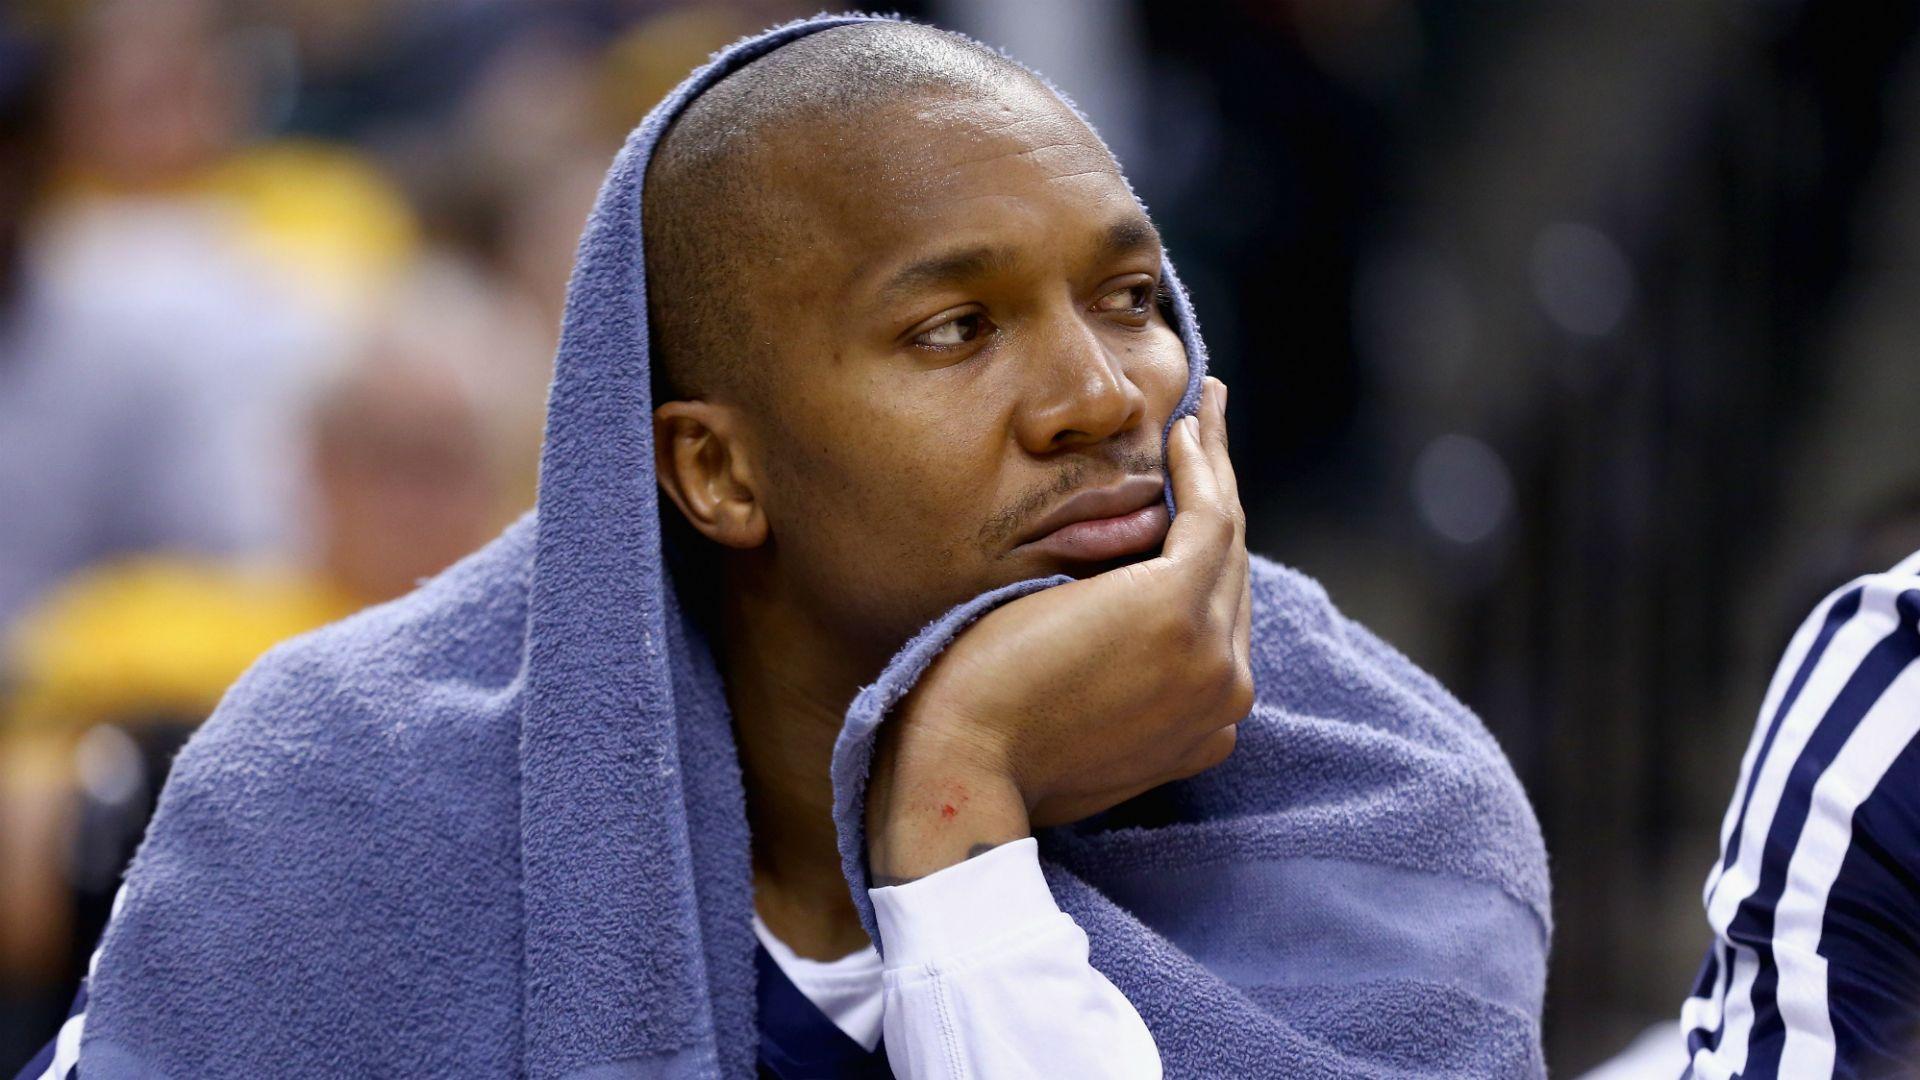 Warriors' David West offers perfect analogy on anthem protest